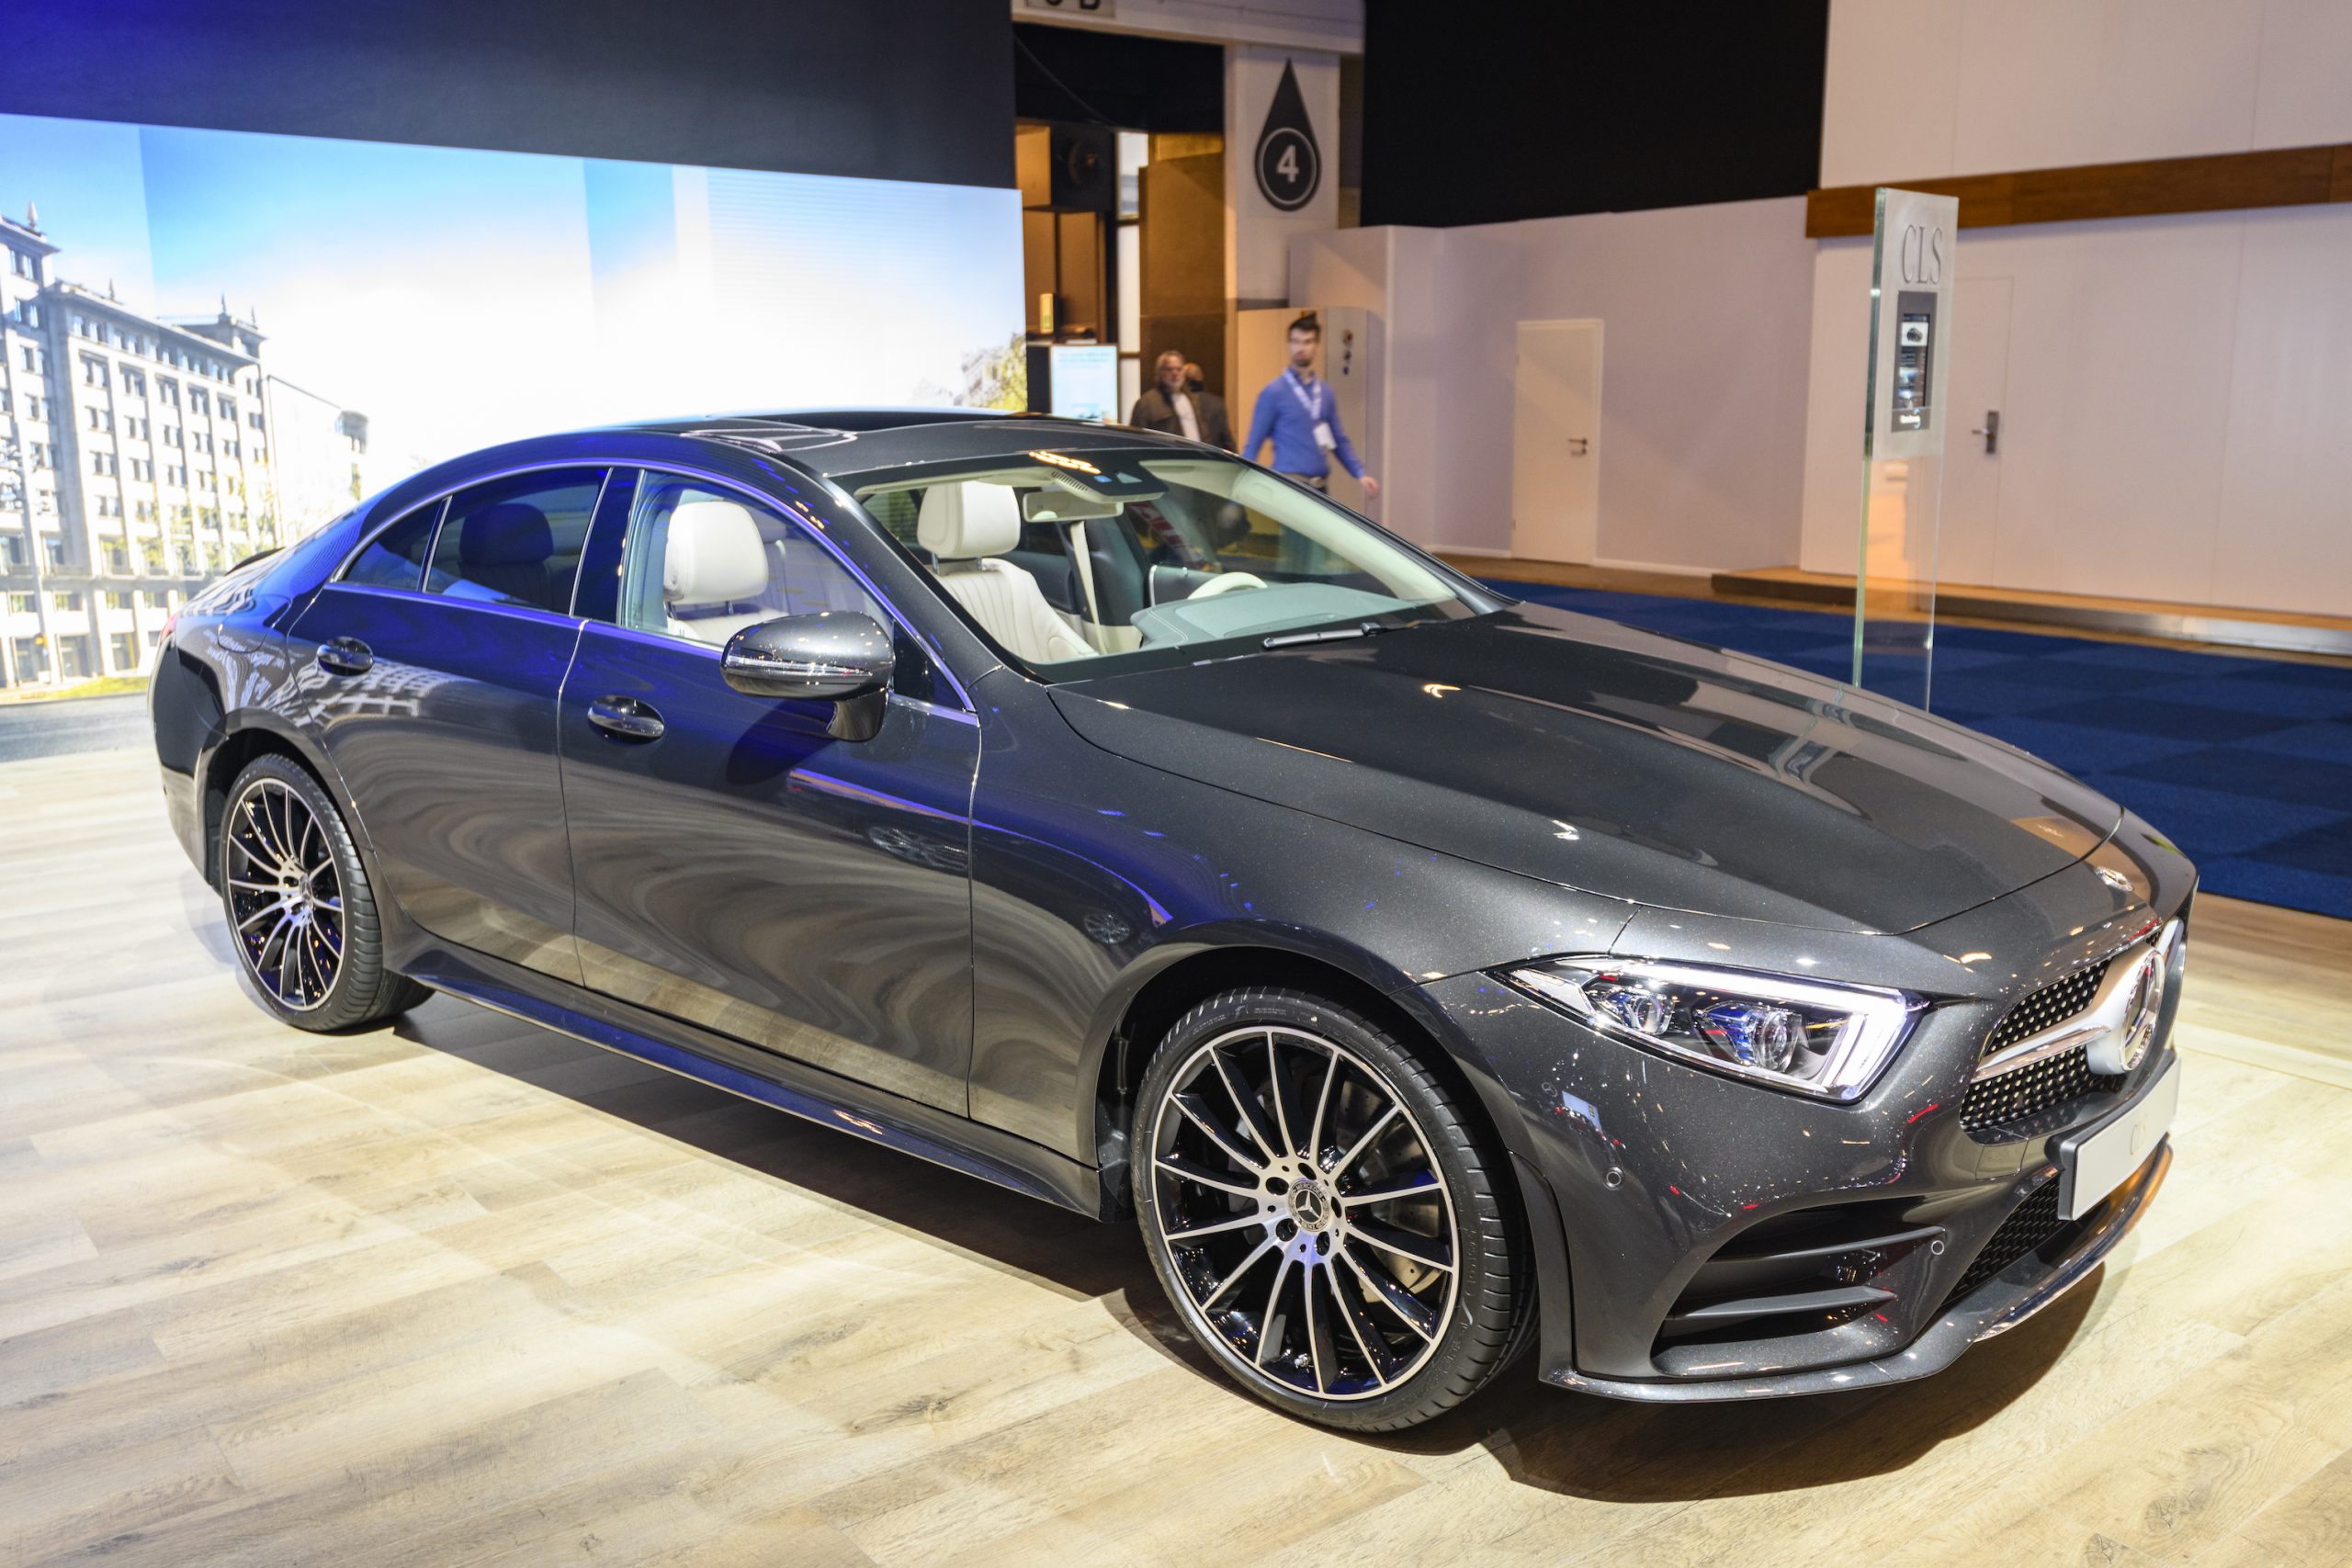 Gray Mercedes-Benz CLS-Class four-door fastback on display at Brussels Expo